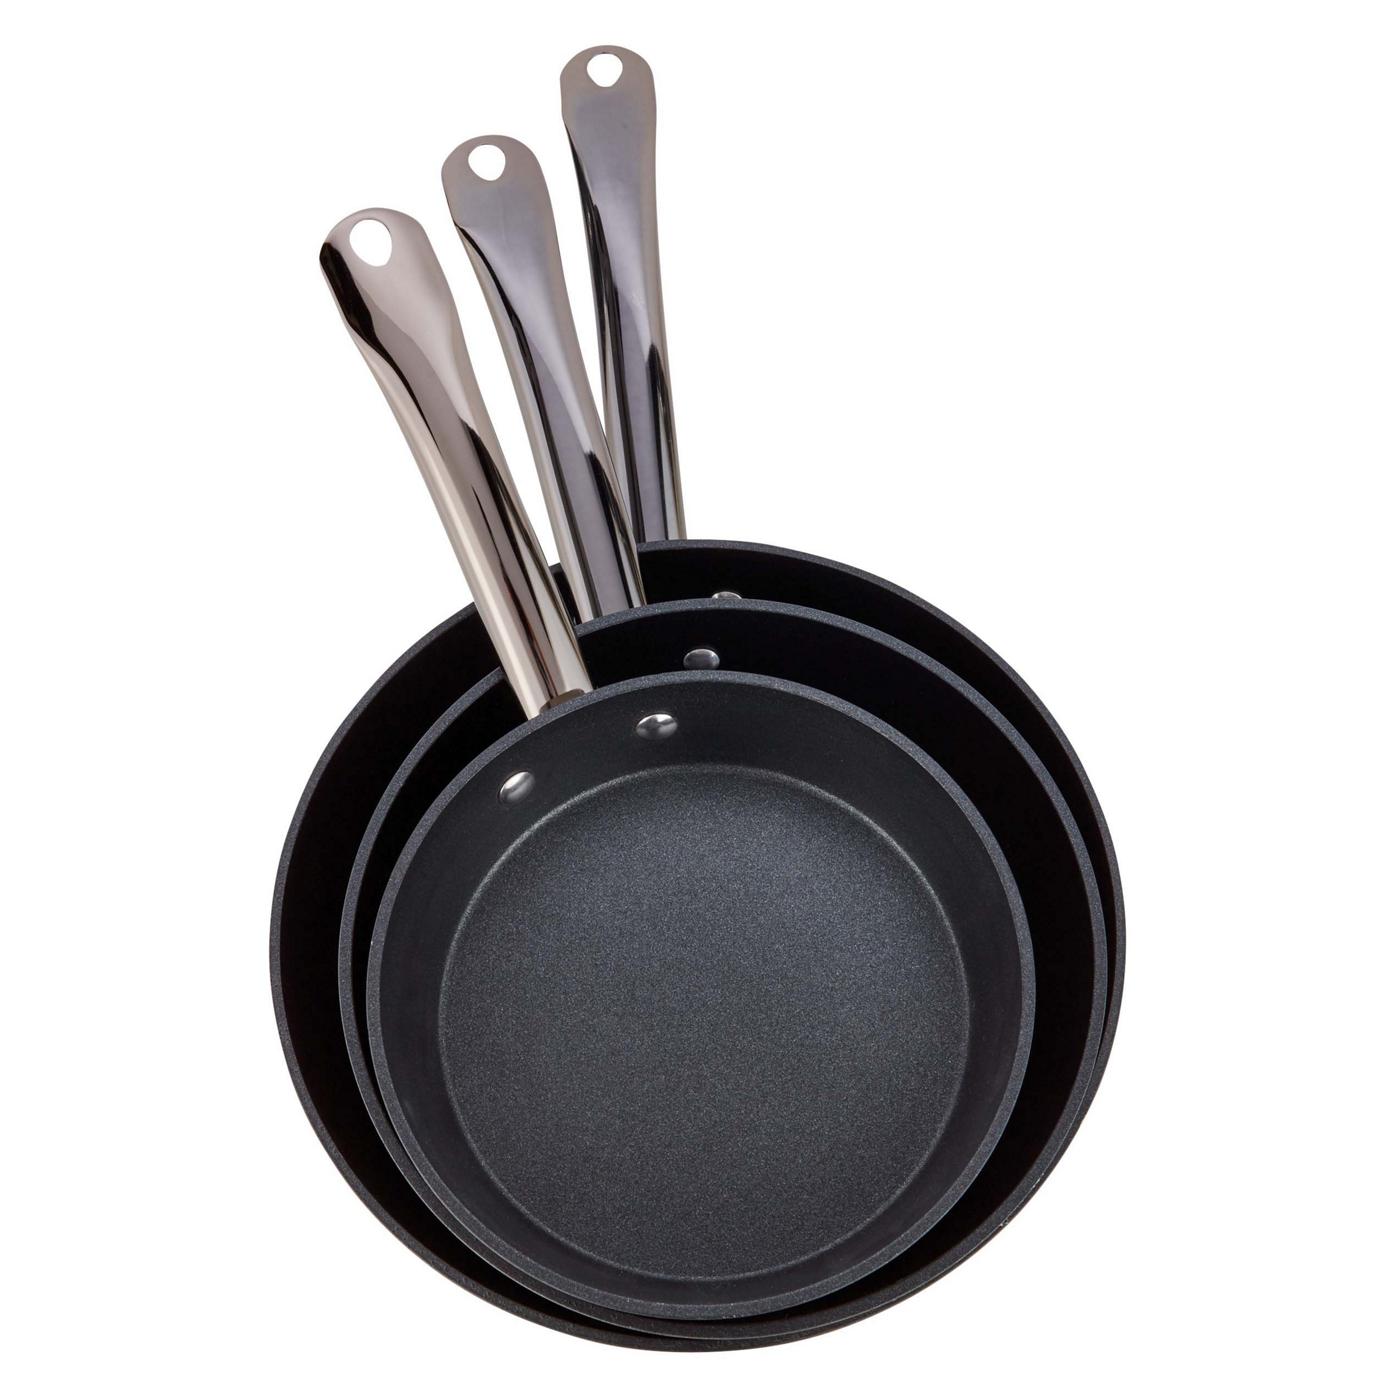 Kitchen & Table by H-E-B Hammered Fry Pan Set - Black; image 1 of 2